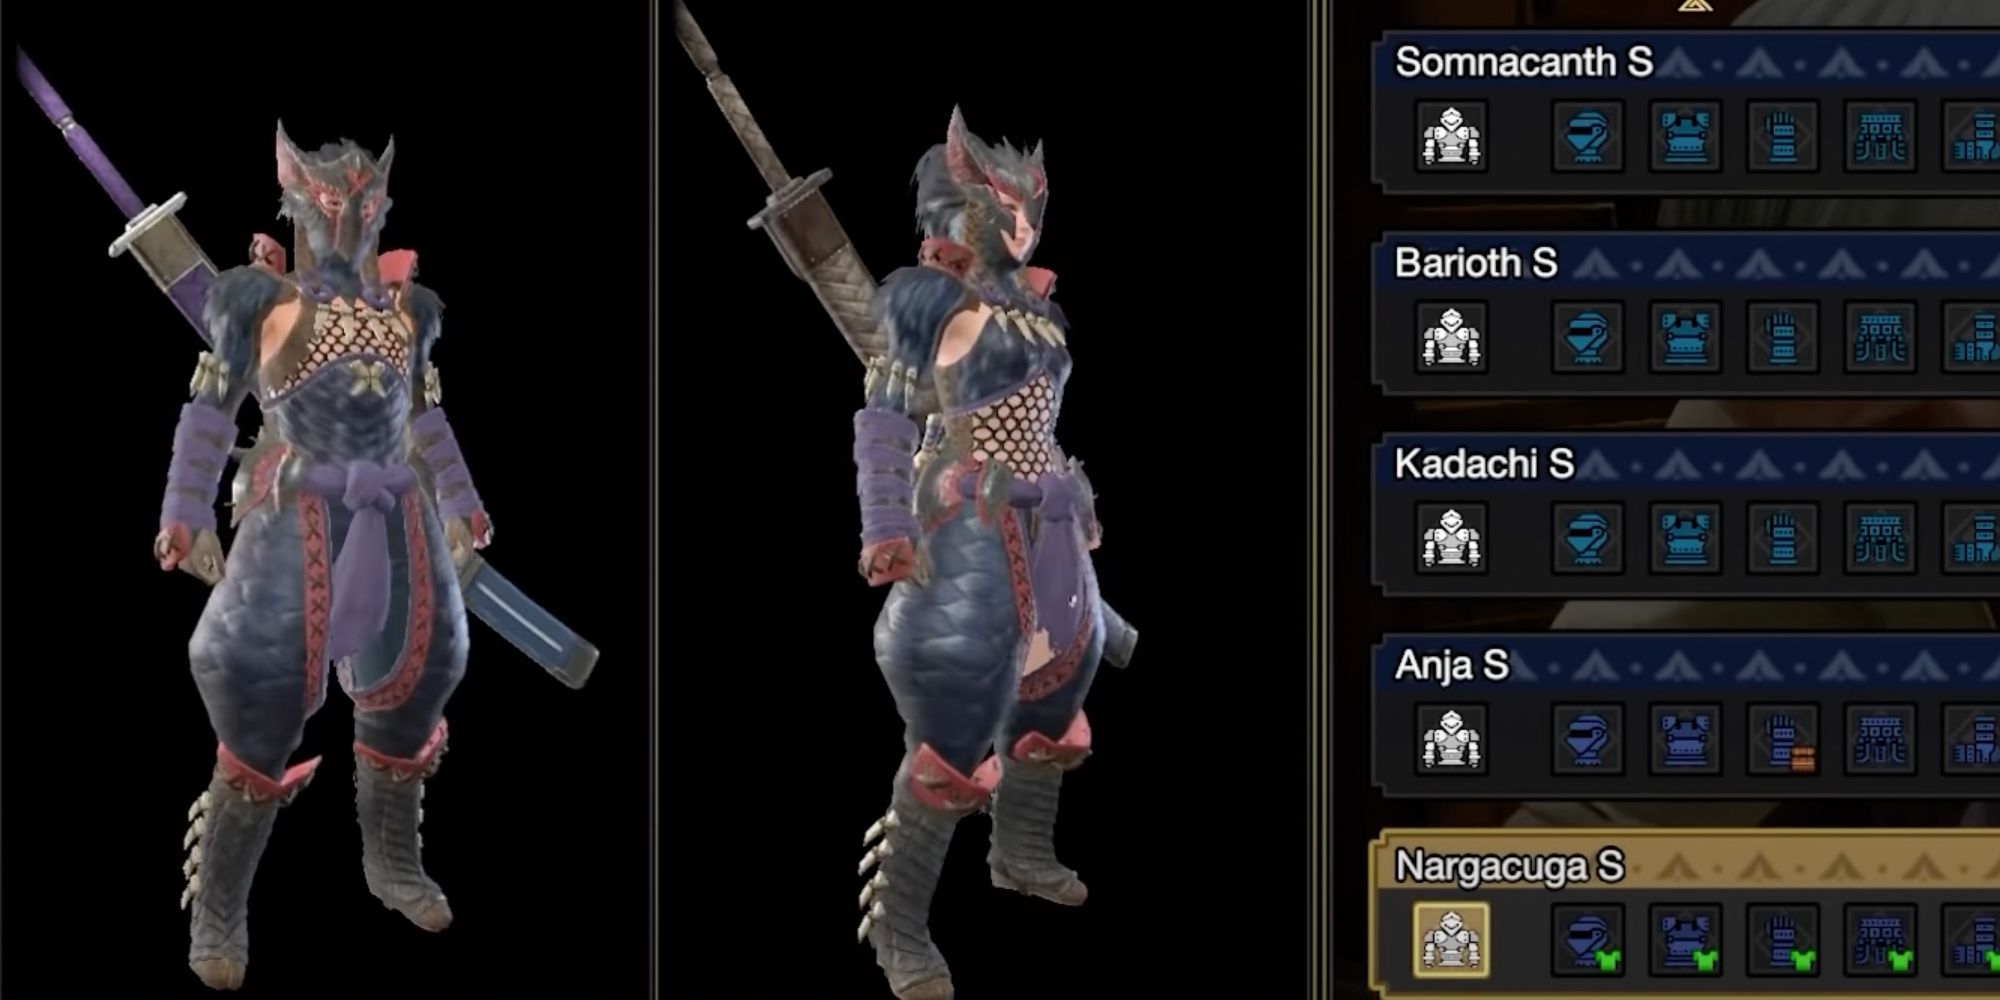 Armor selection screen showing both gendered Hunters in Nargacuga Armor